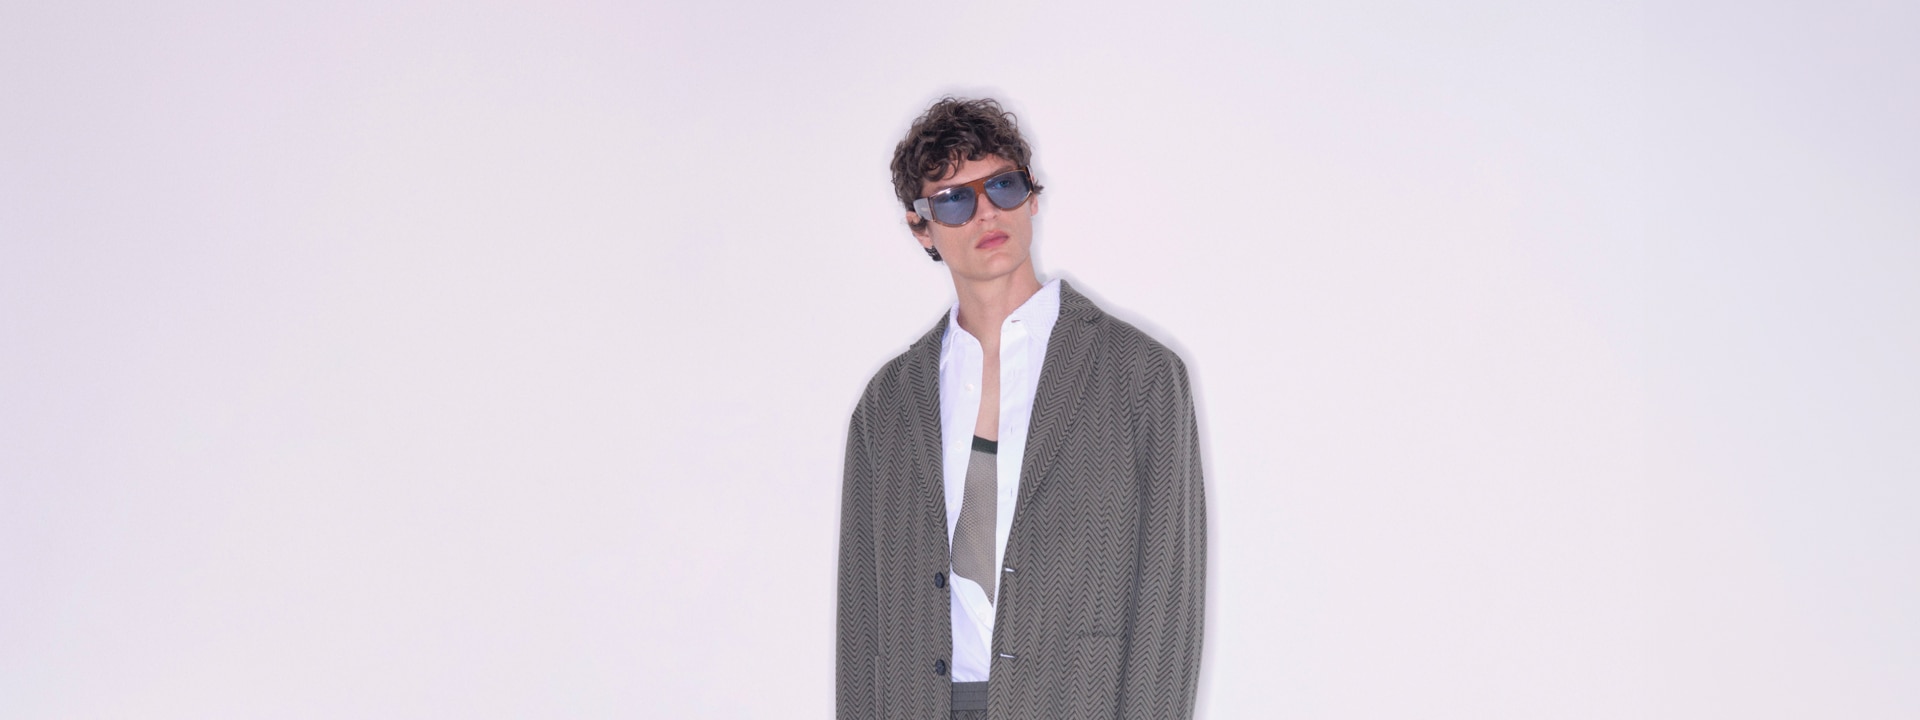 The model wears a gray suit from the new Spring Summer 2023 collection